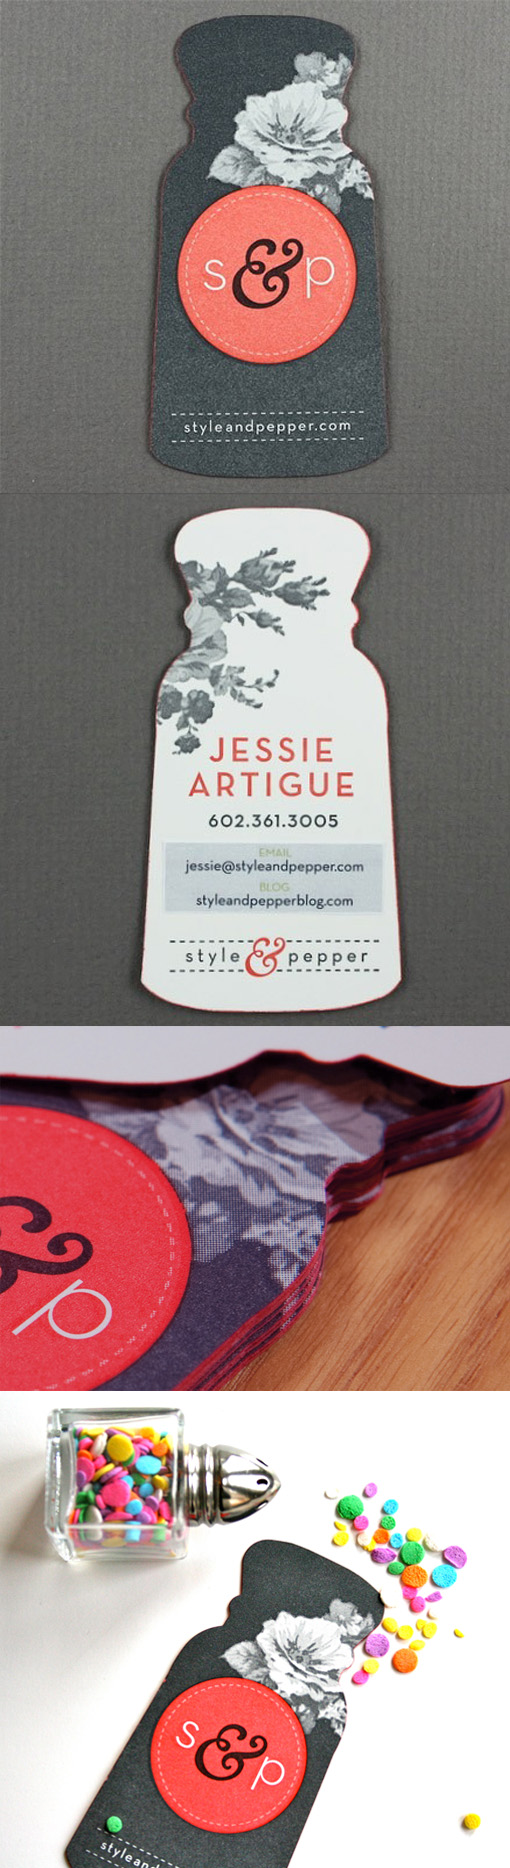 Sweet Custom Die Cut And Edge Painted Business Card Design For A Lifestyle Blogger